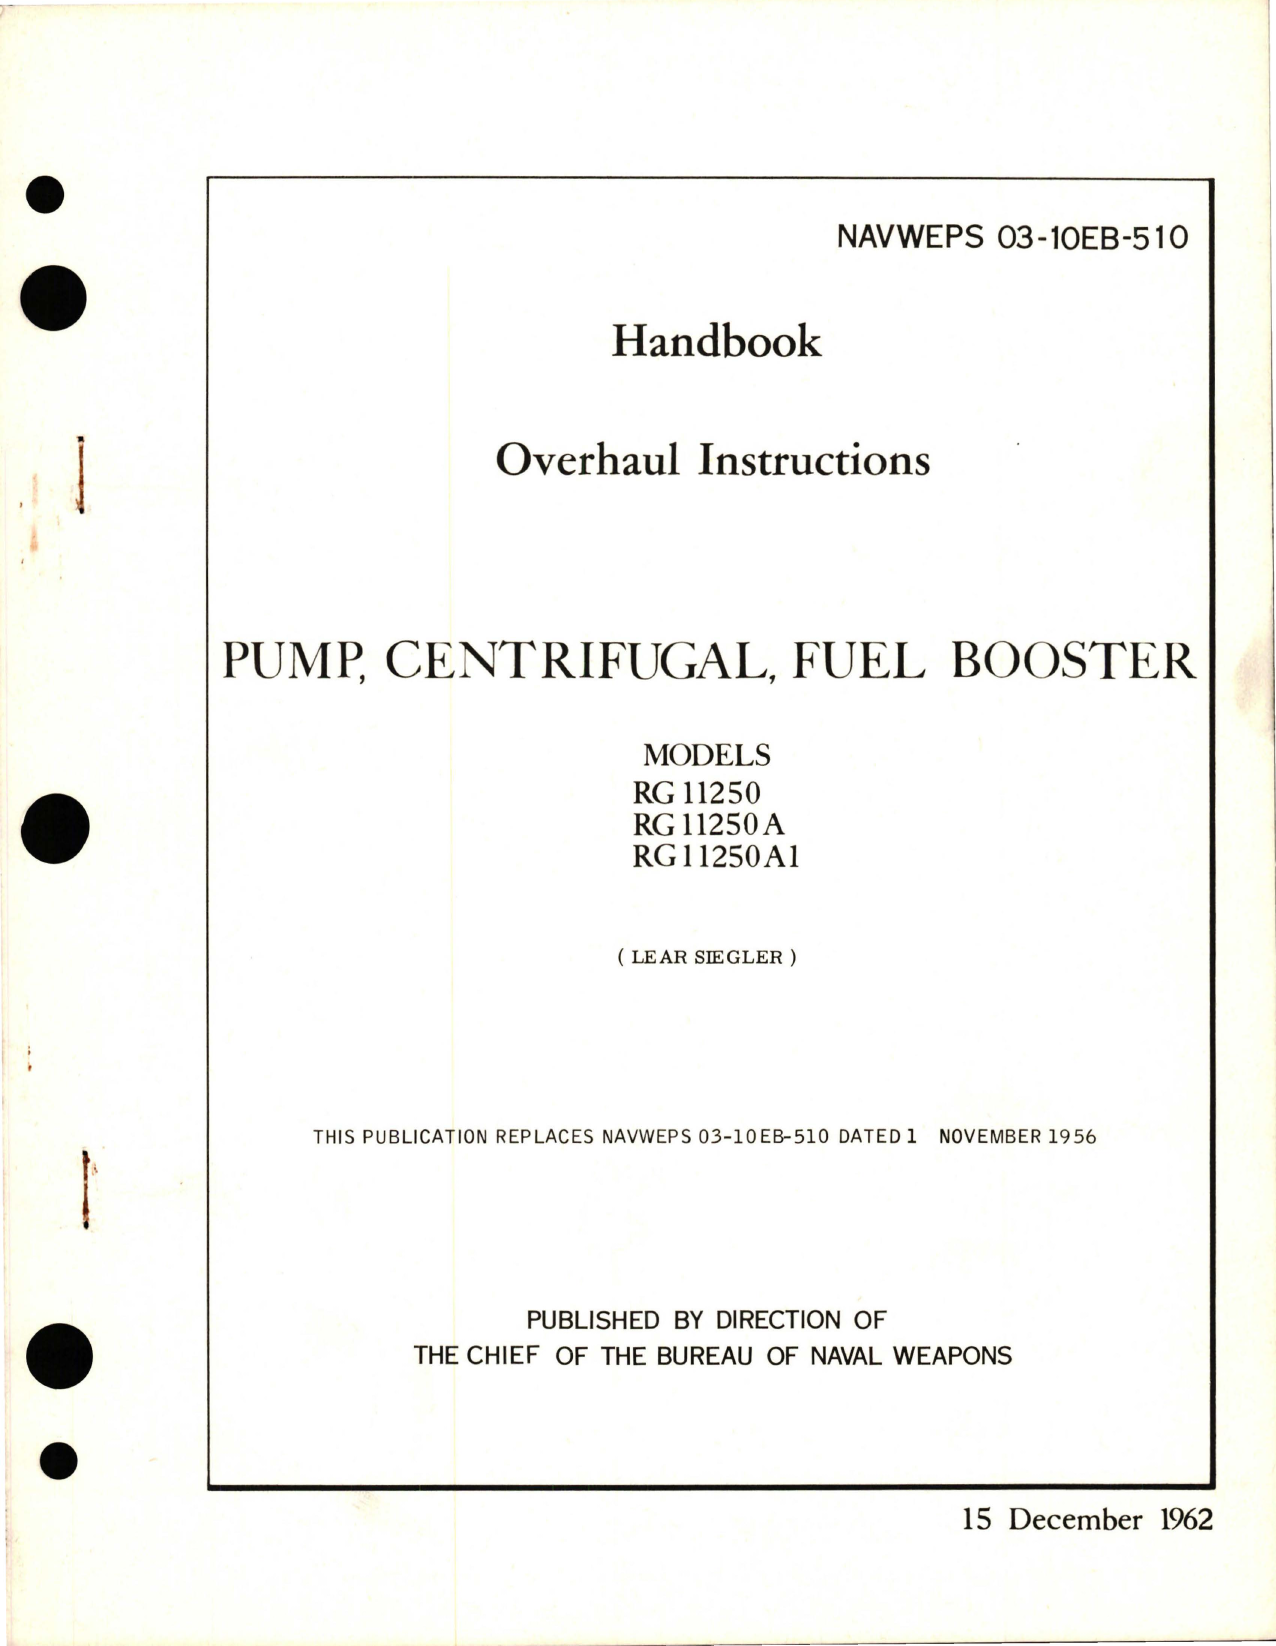 Sample page 1 from AirCorps Library document: Overhaul Instructions for Centrifugal Fuel Booster Pump - Models RG11250, RG11250A, and RG11250A1 